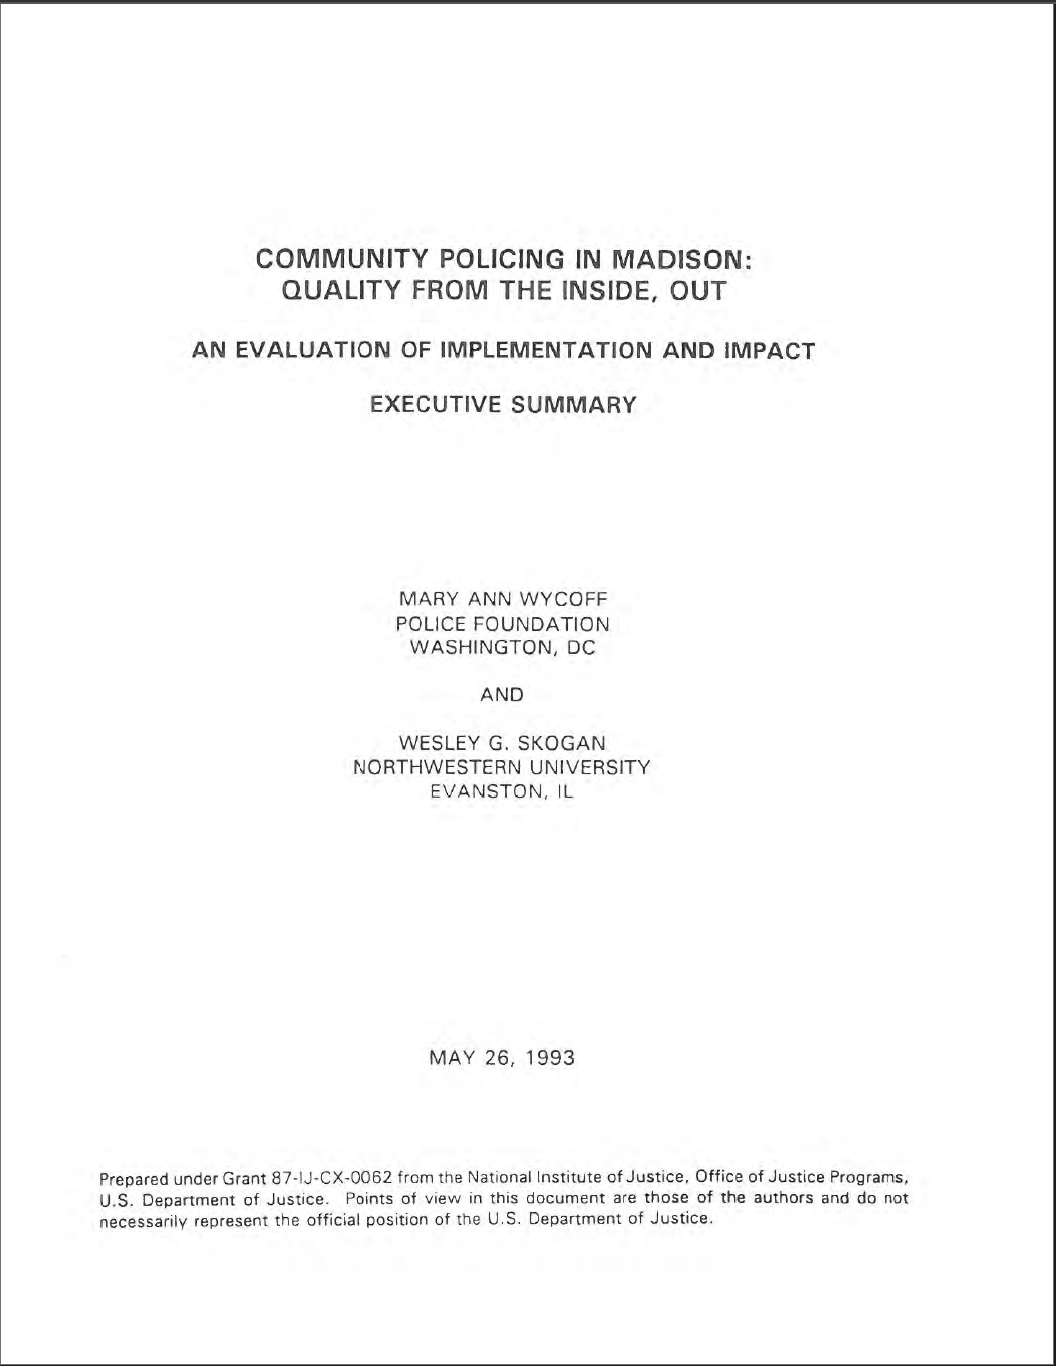 Community policing in Madison-report cover